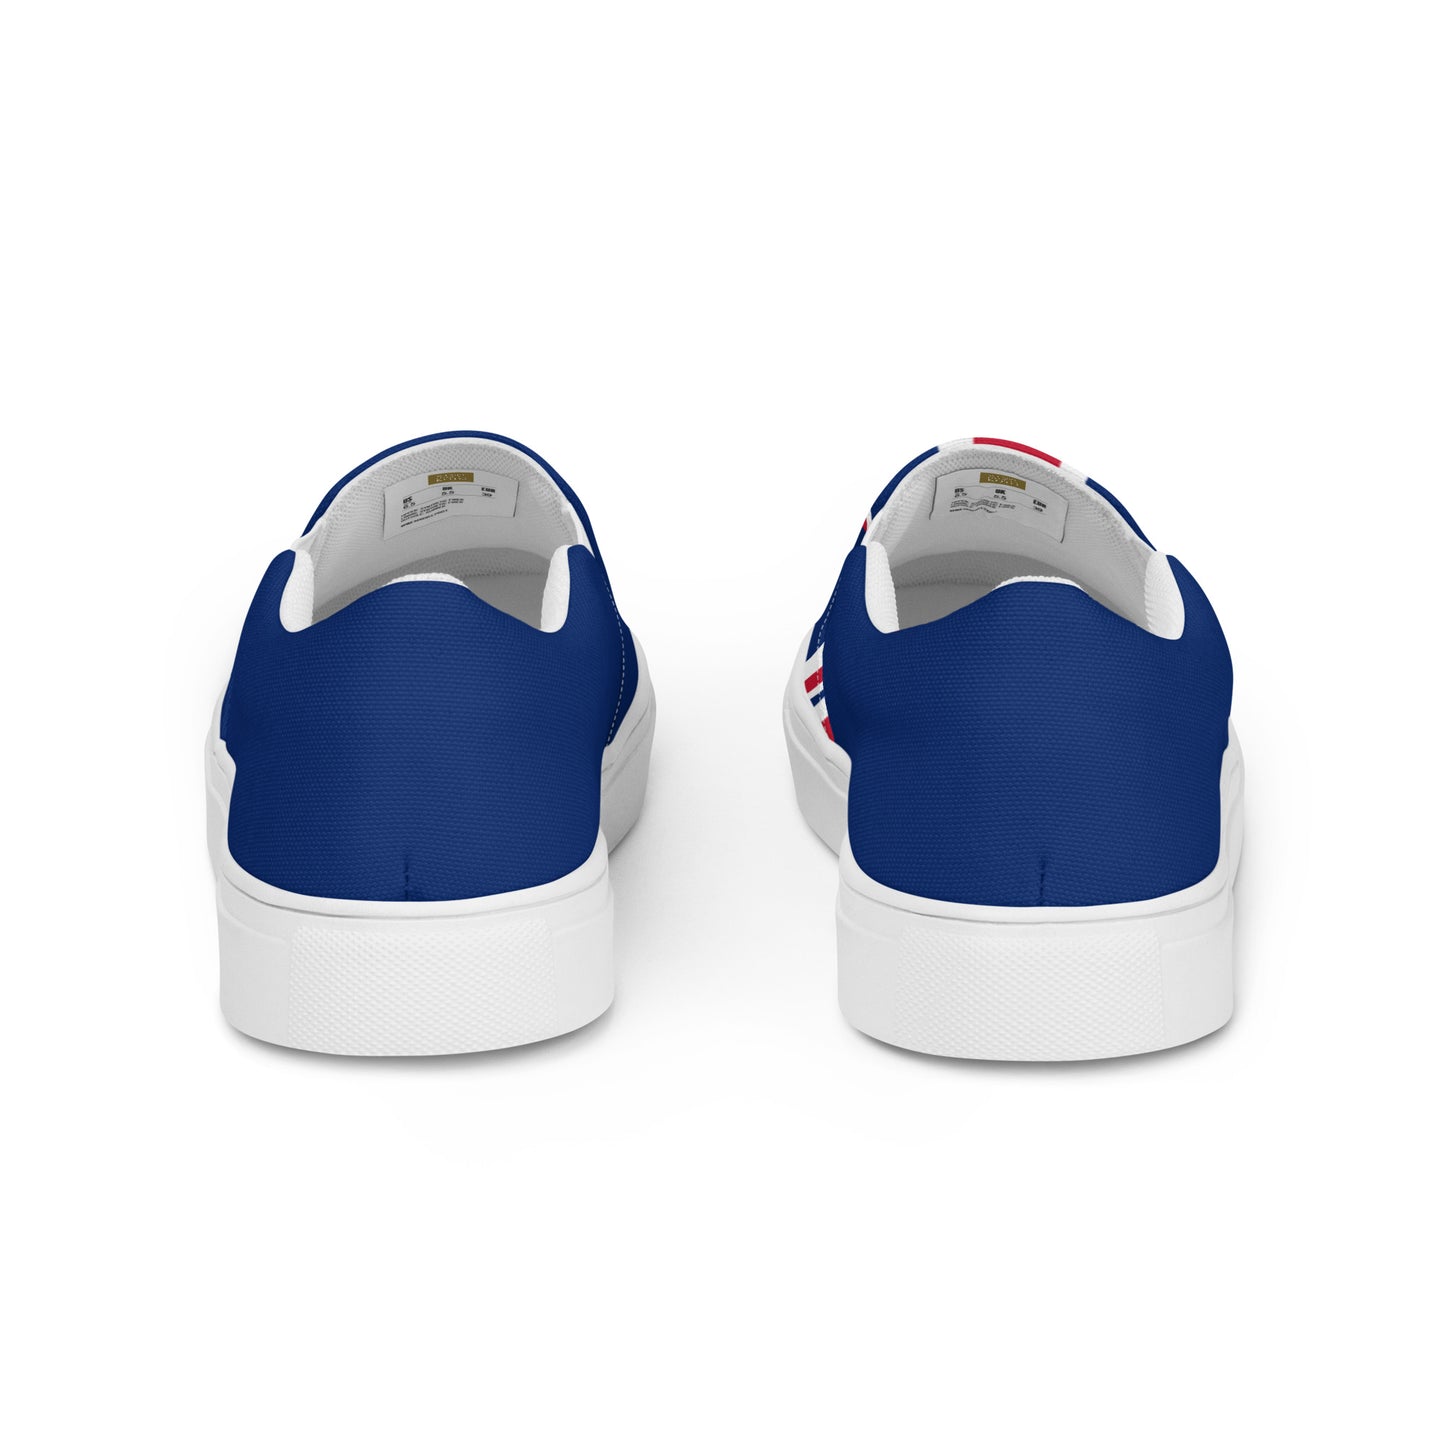 New Zealand Flag - Women’s slip-on canvas shoes